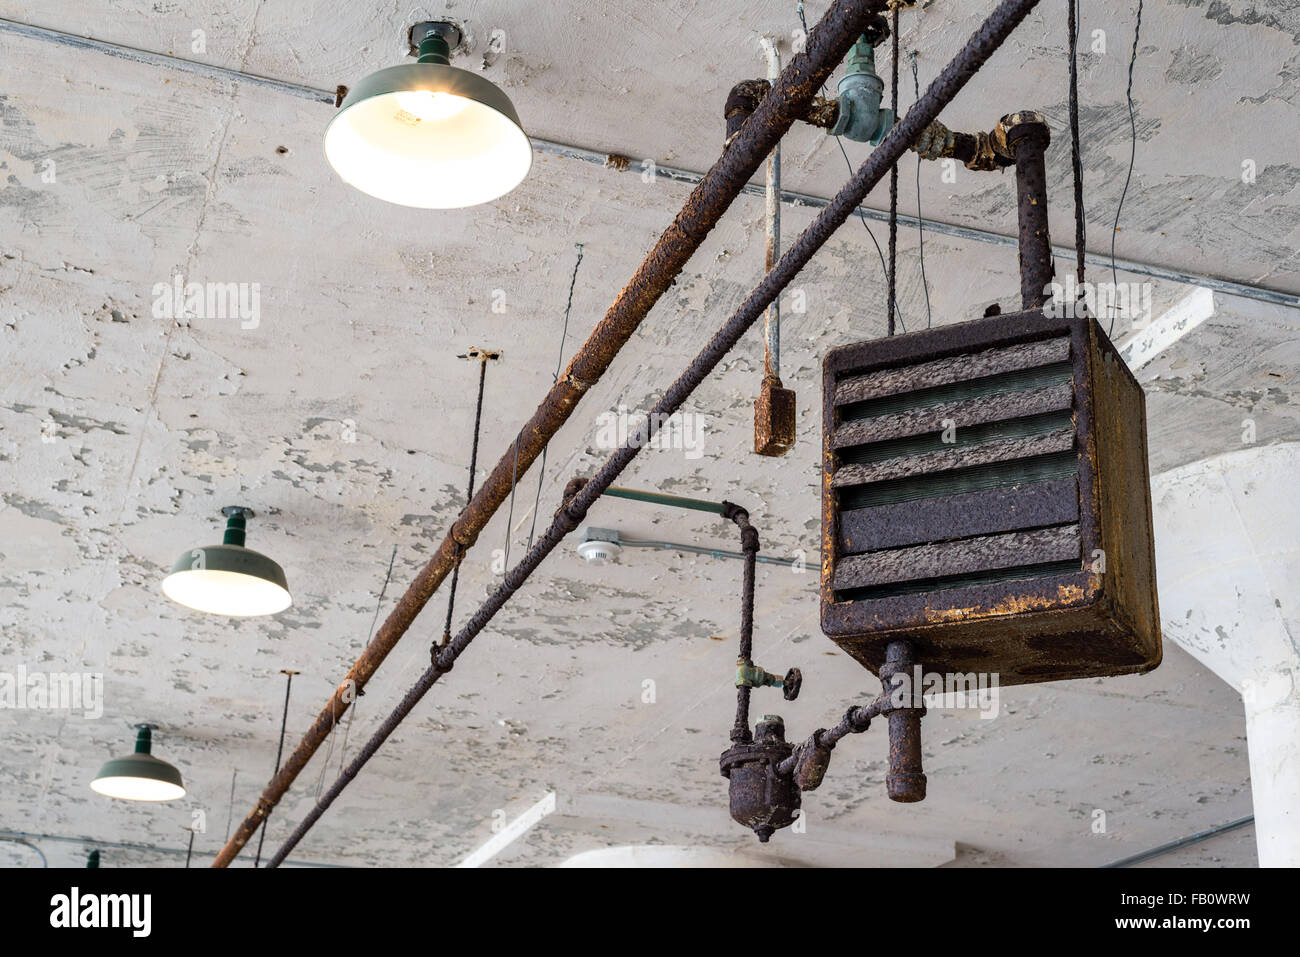 Old and disused heating unit in Alcatraz Prison Stock Photo